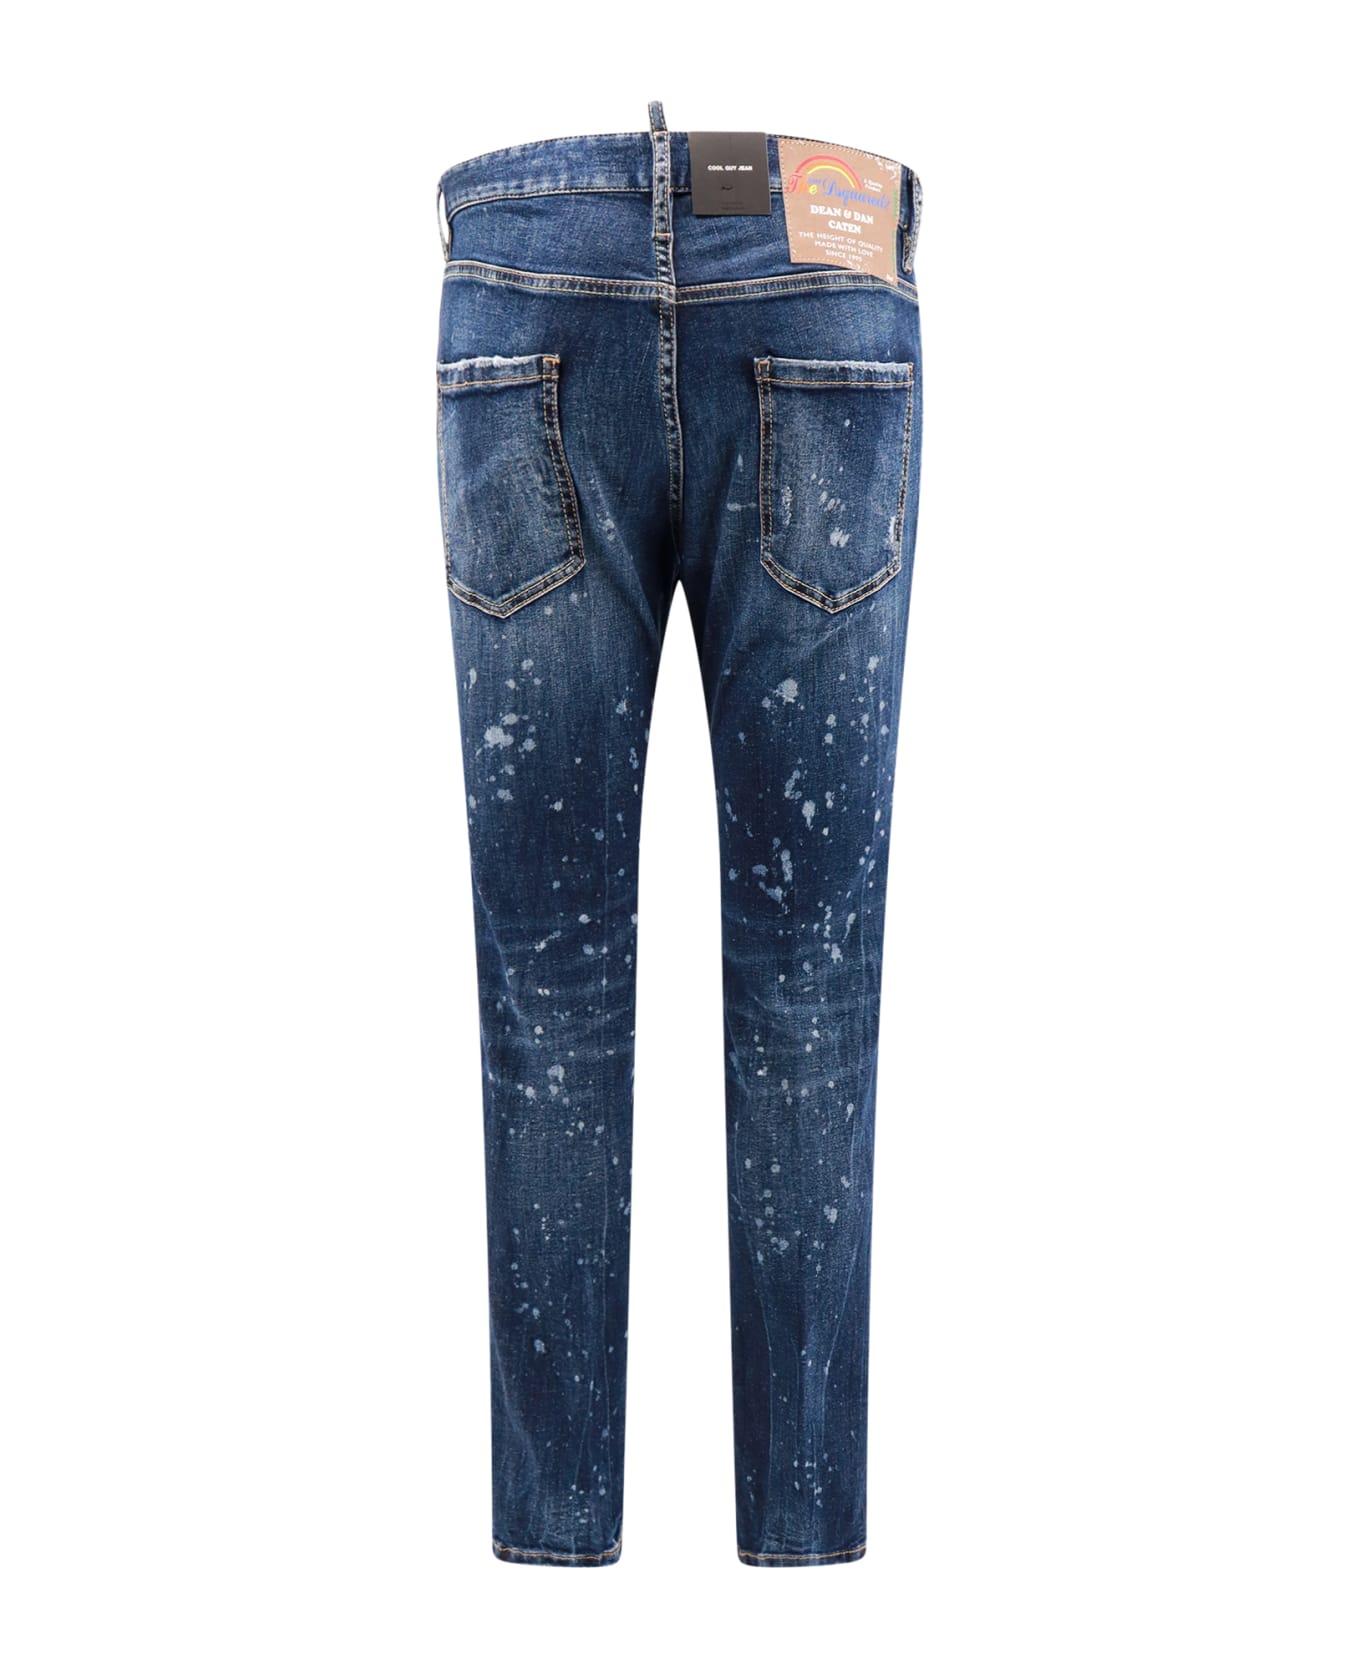 Dsquared2 Cool Guy Jean Jeans - Blue デニム